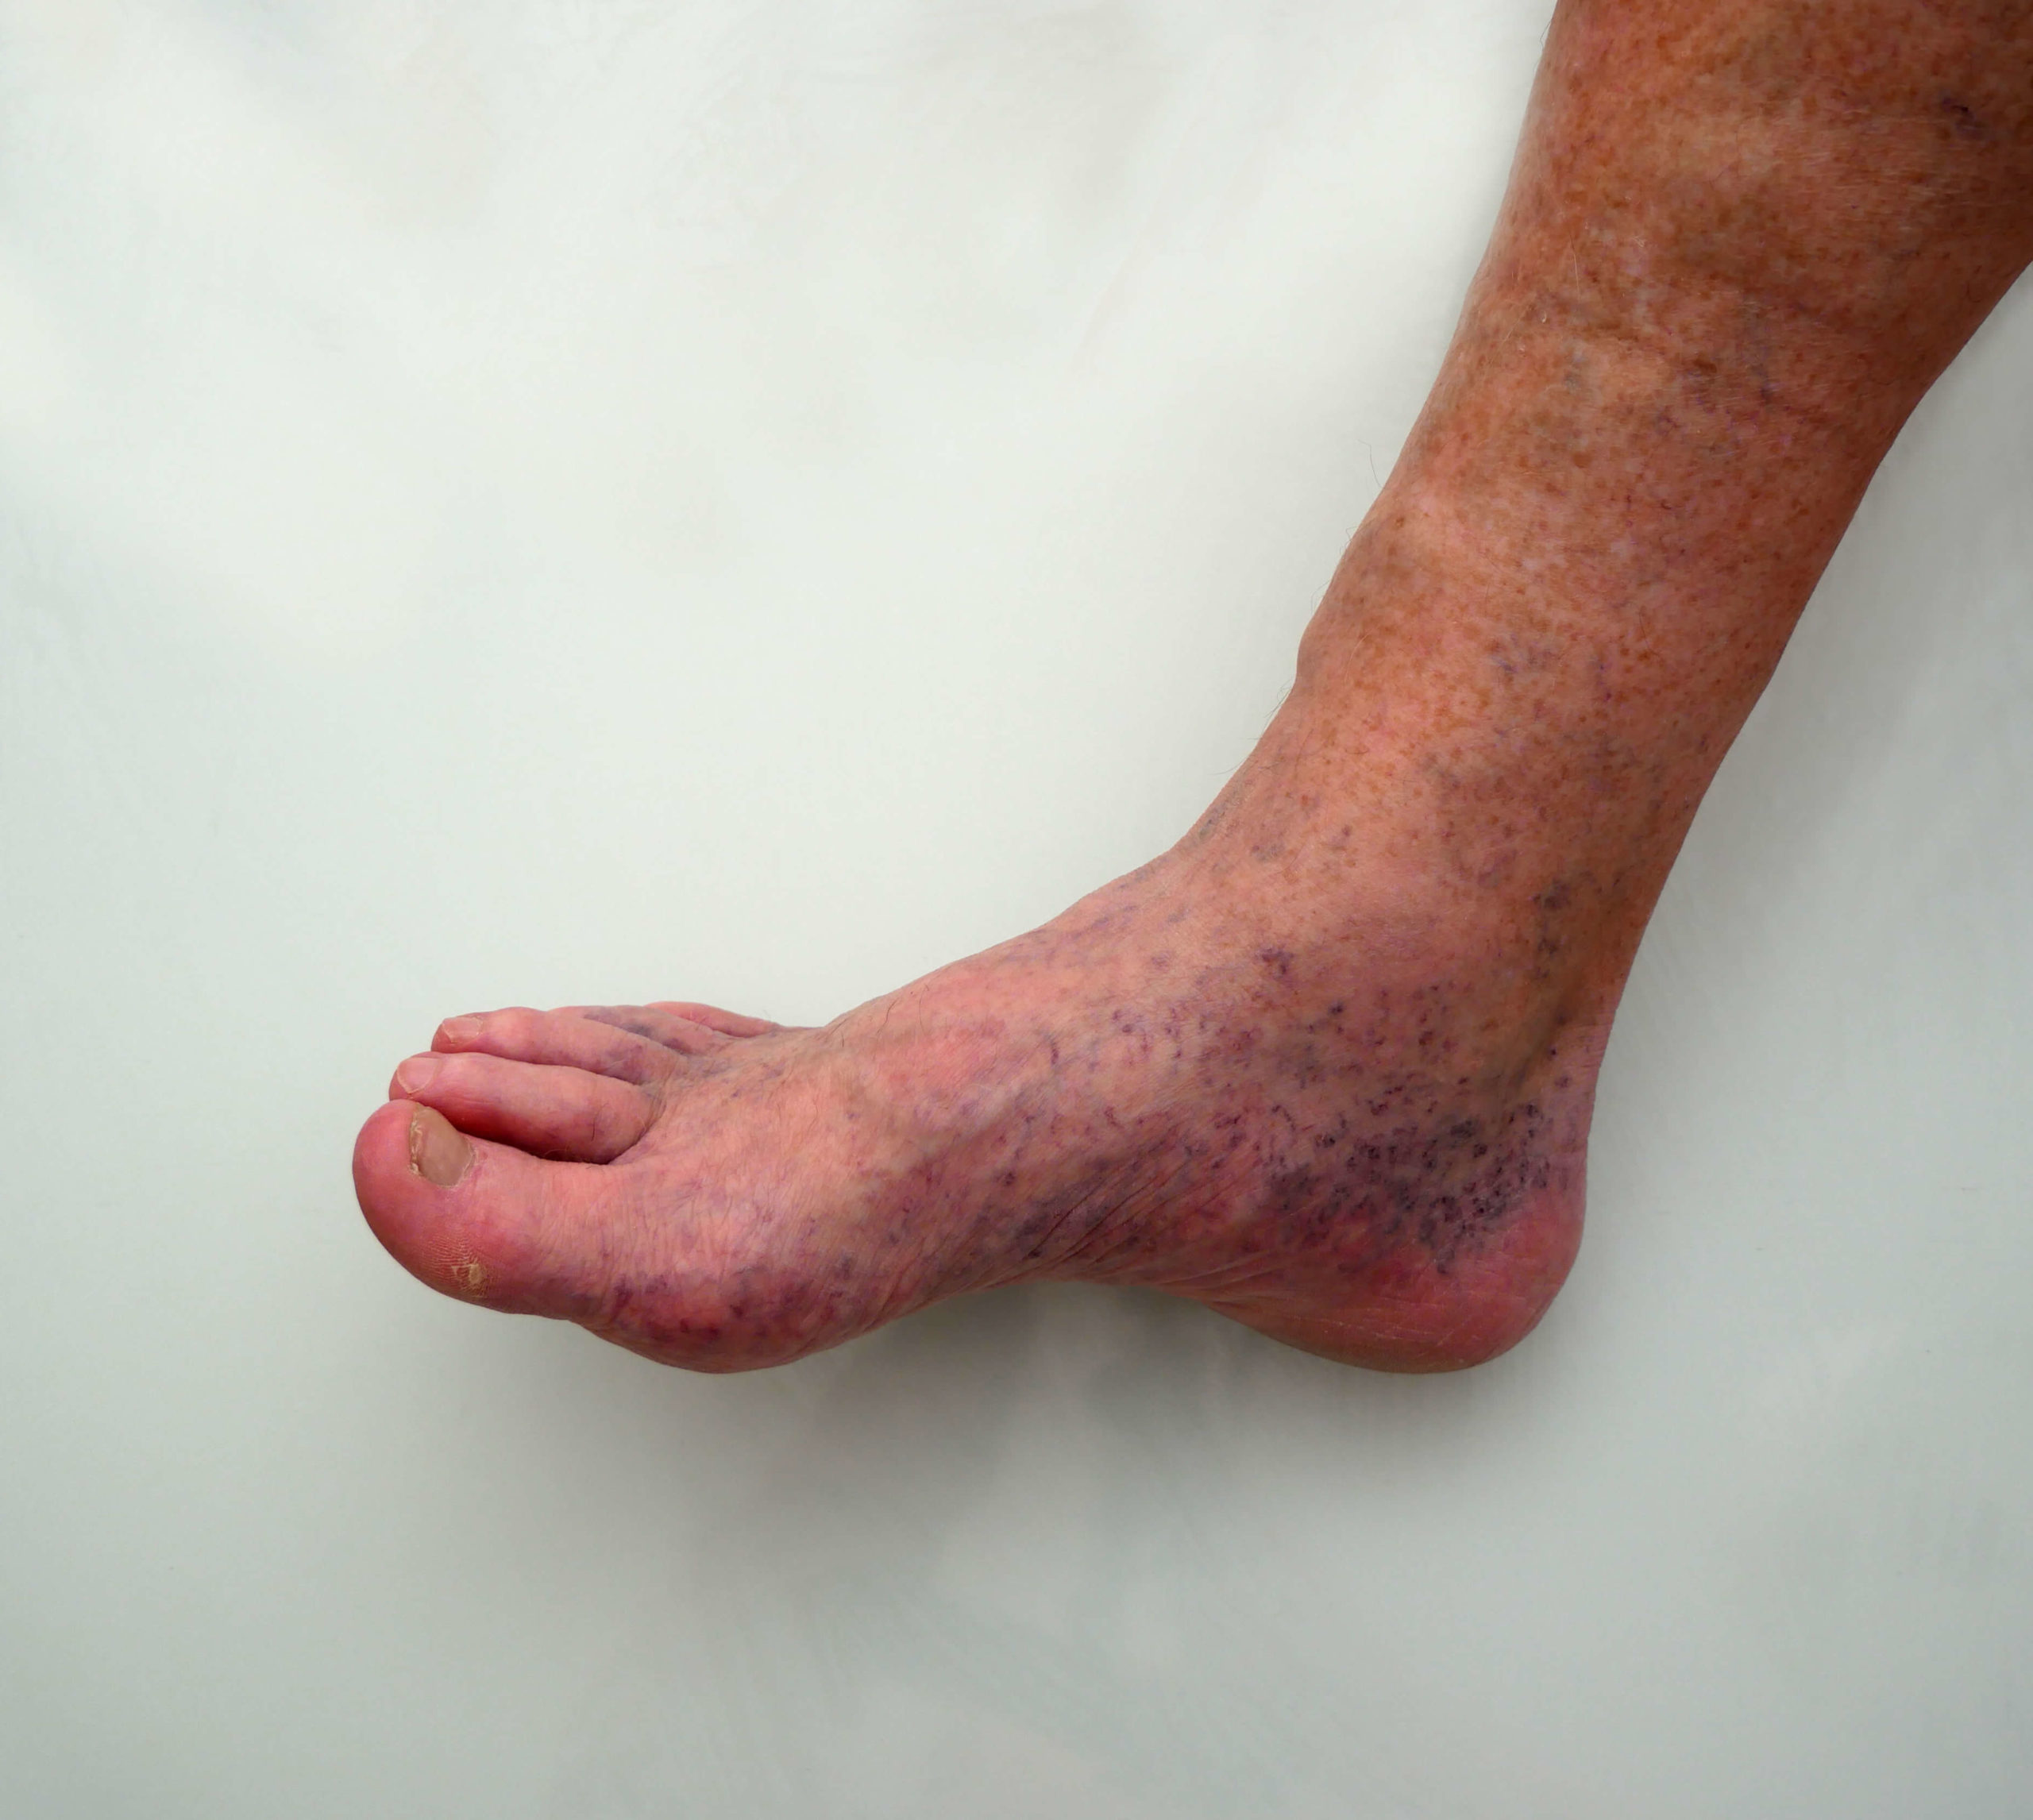 foot condition due to bad vein health